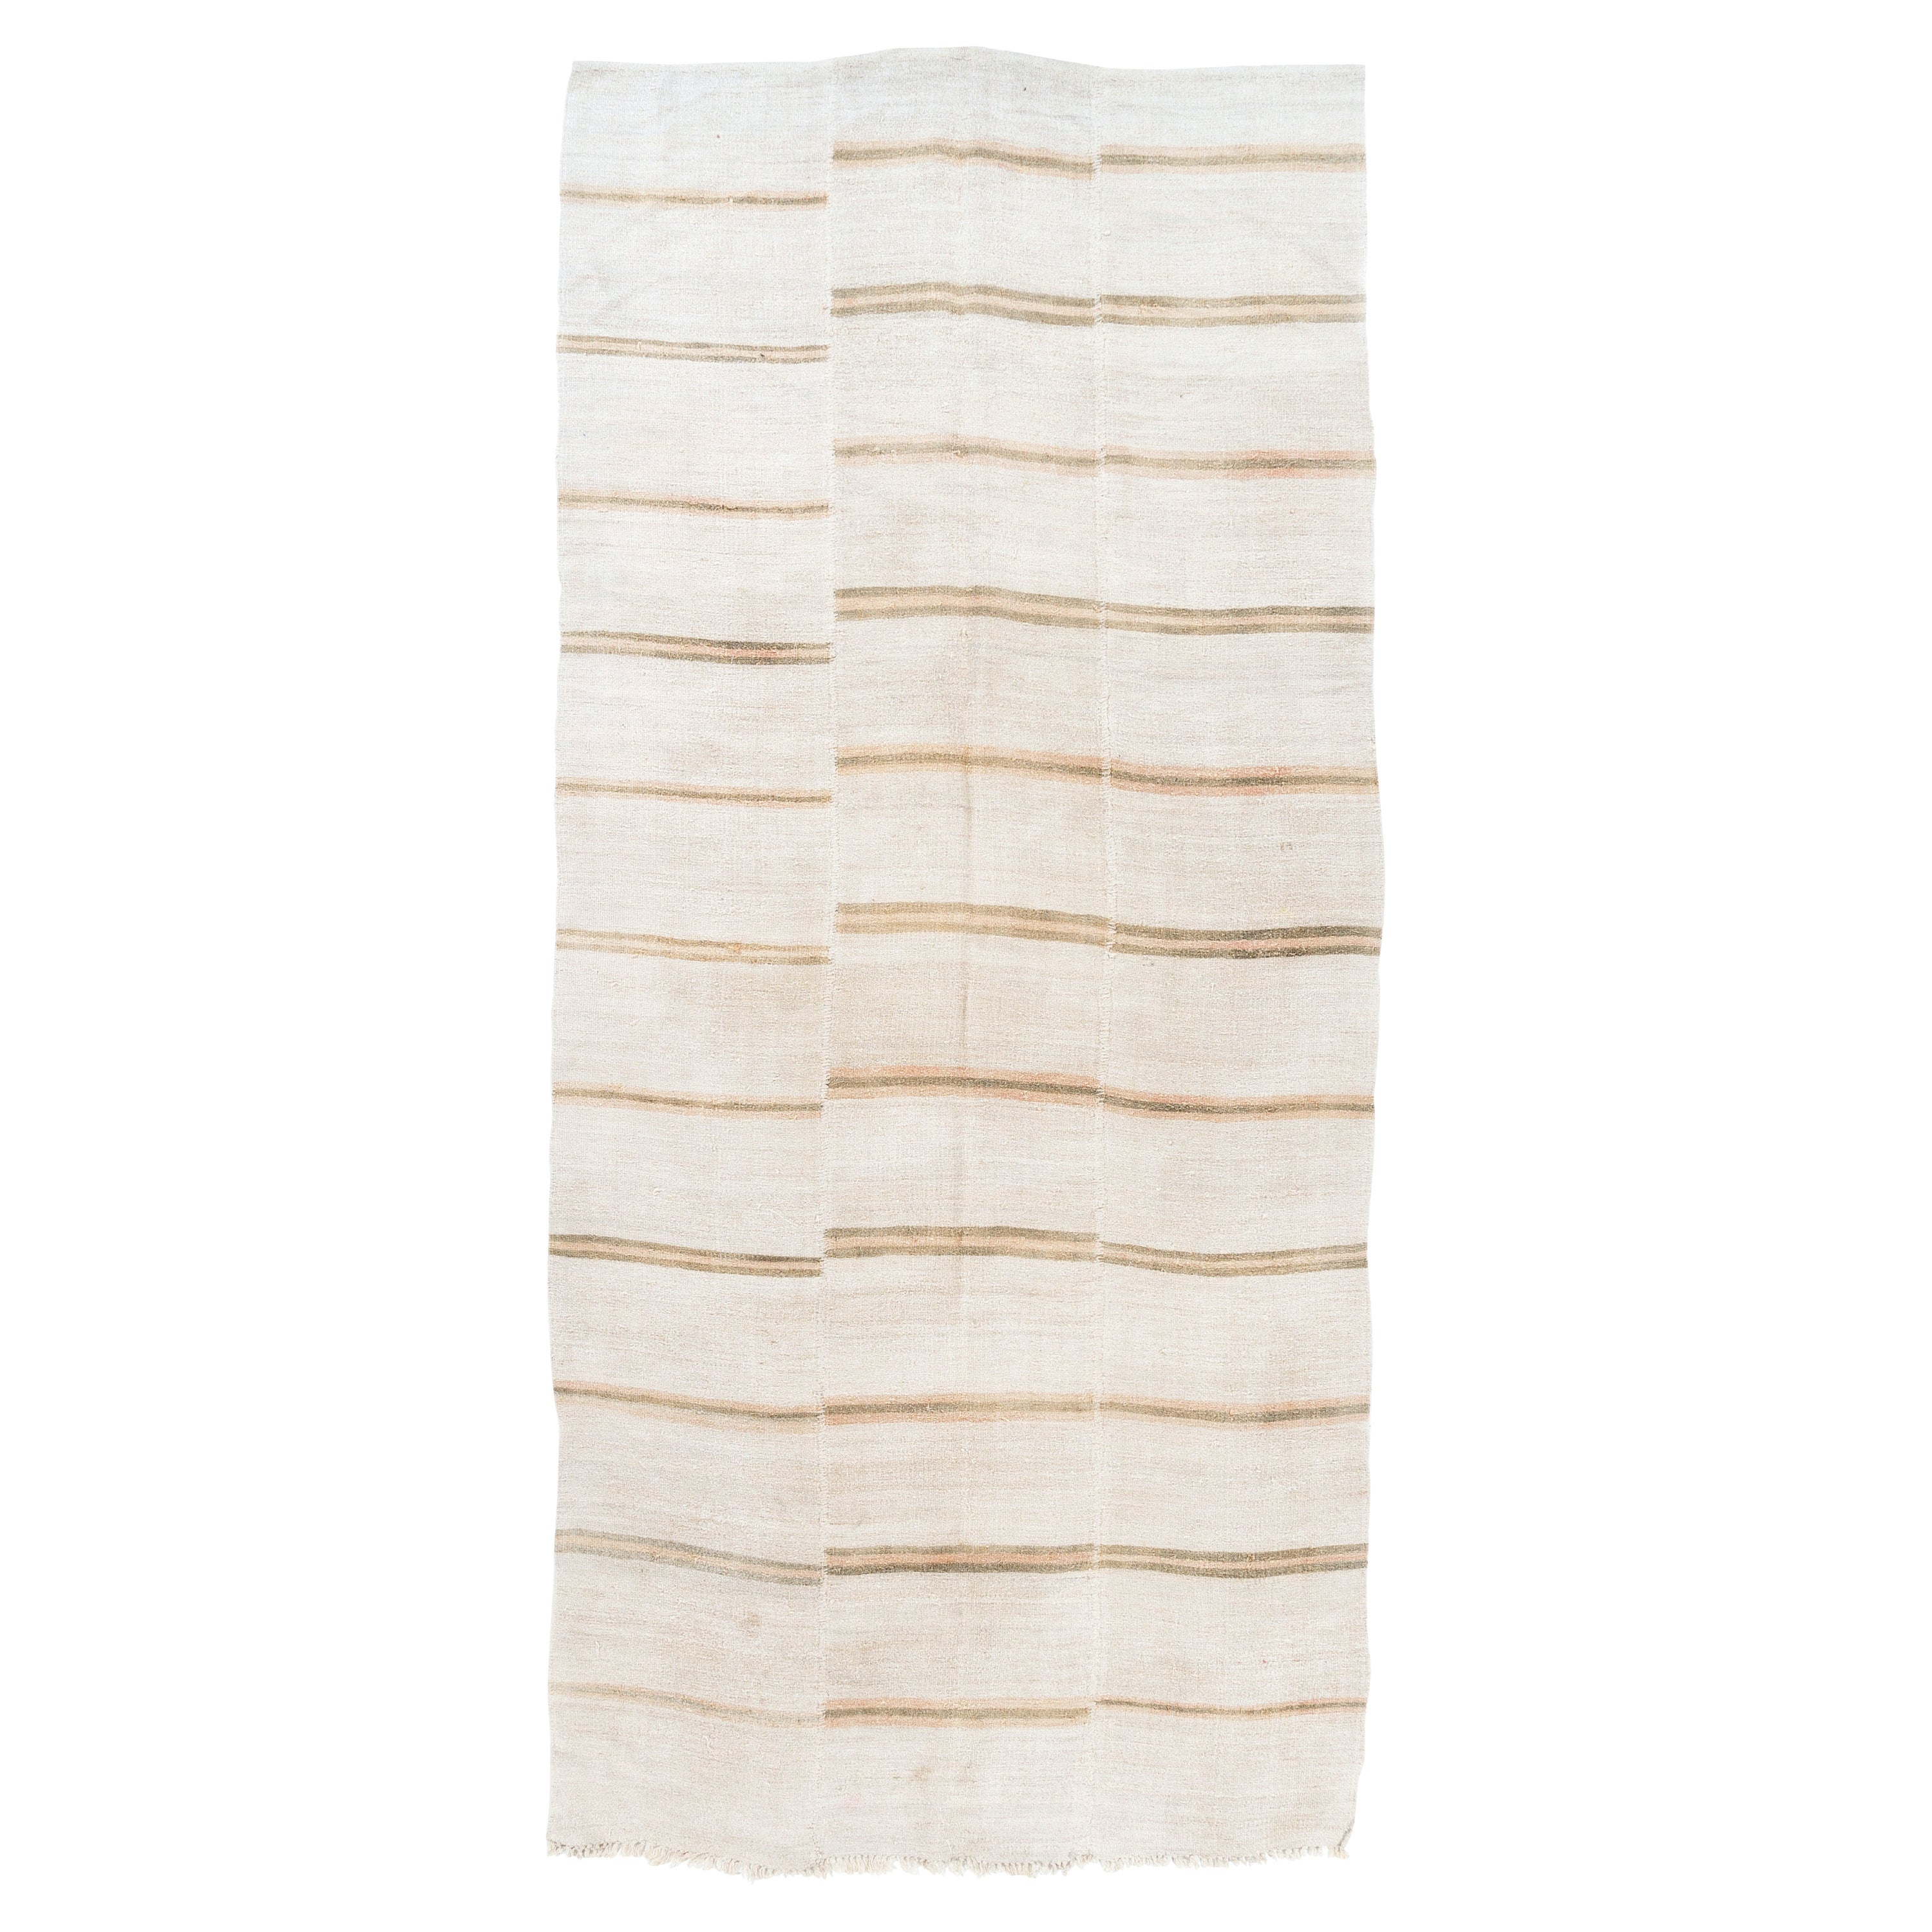 5.8x12.4 Ft Vintage Handwoven Striped Kilim Made of Hemp Flatweave Rug in Ivory For Sale